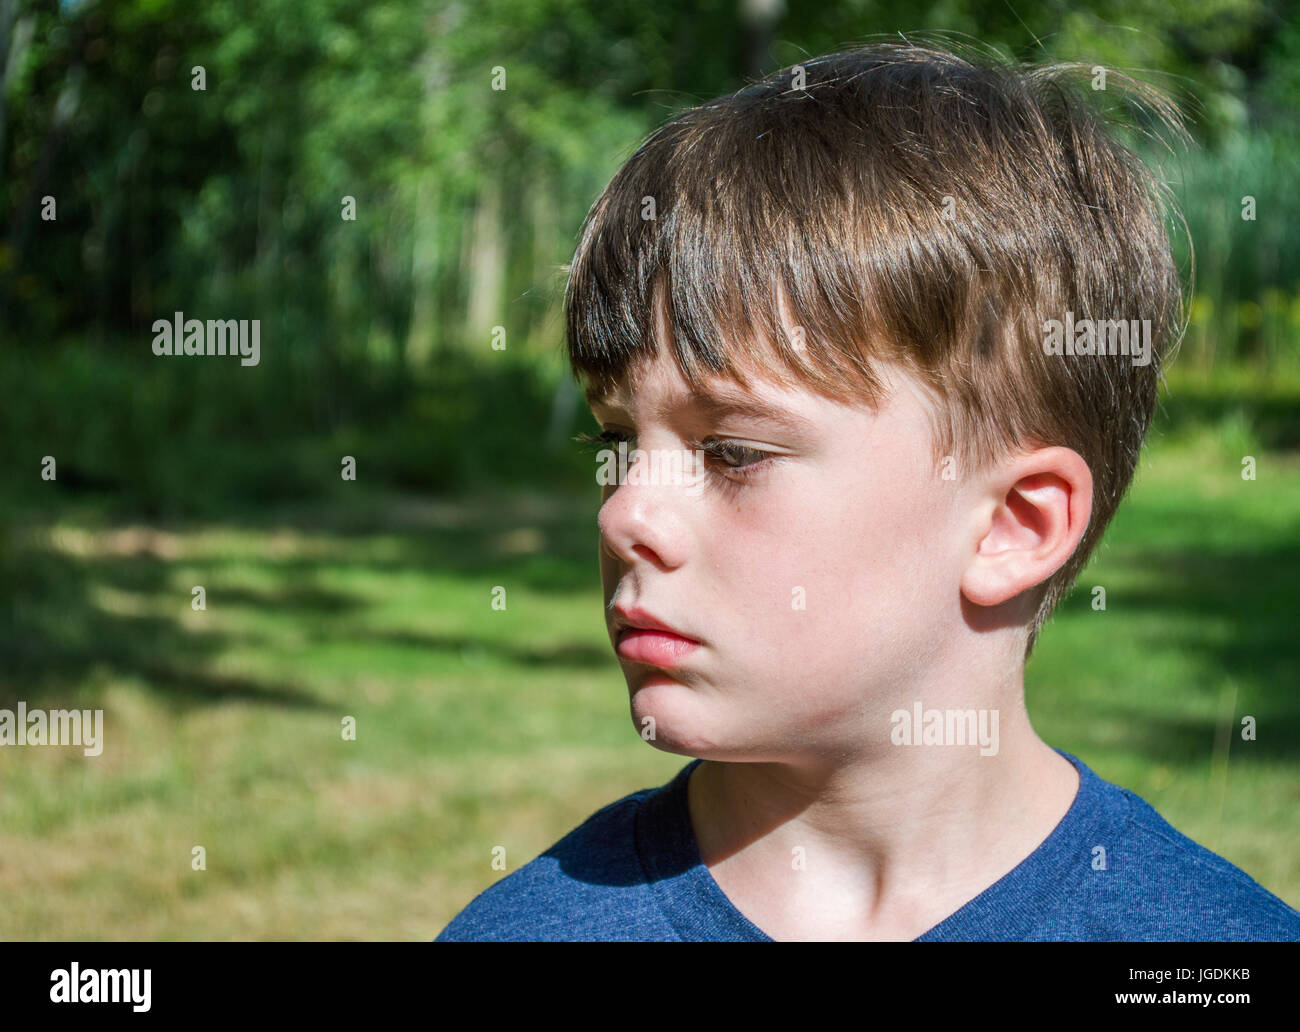 side view close up of young caucasian boy looking pensive Stock Photo